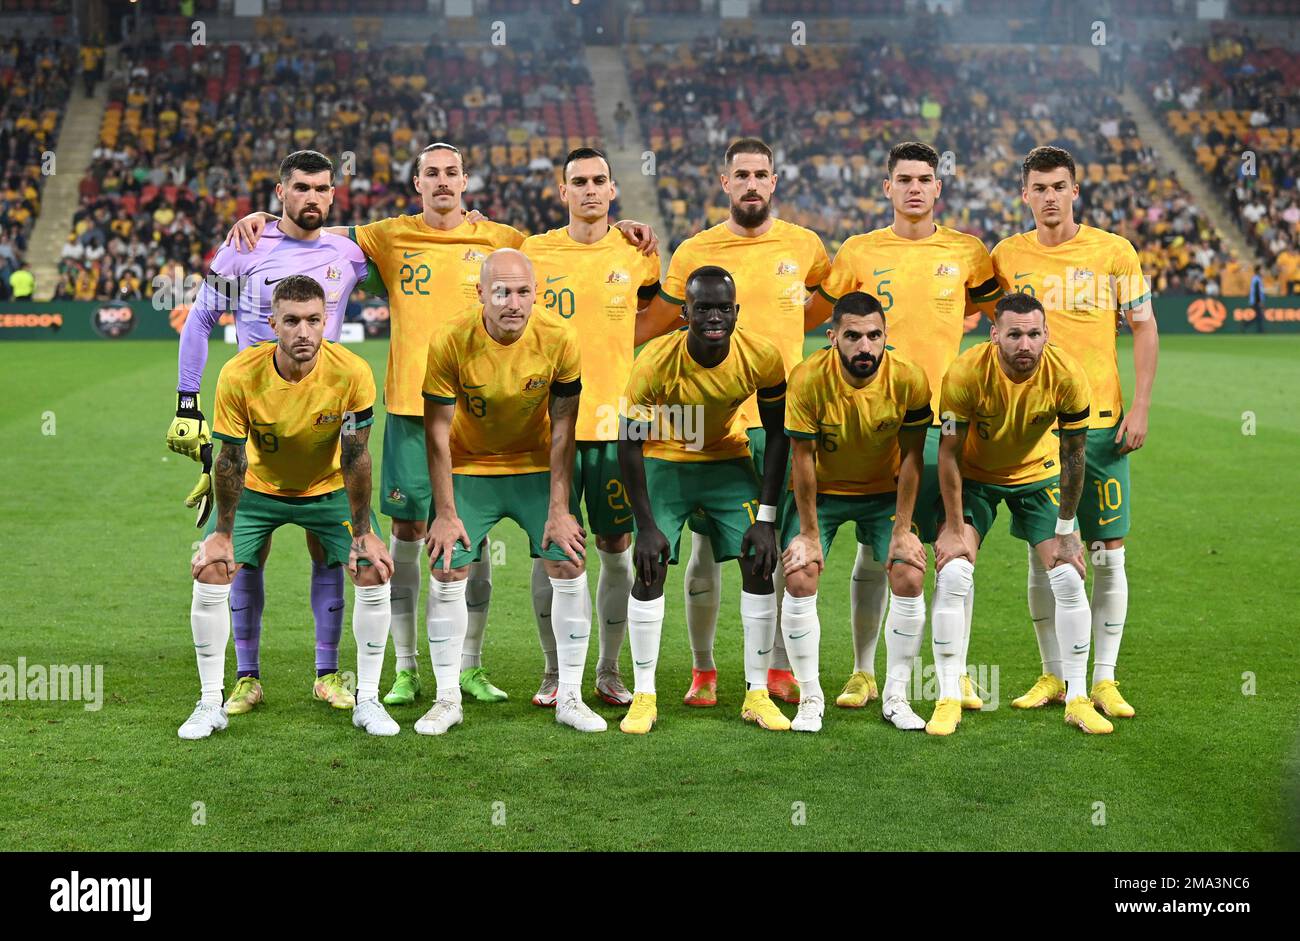 The Australian national soccer team, the Socceroos, pose for a photo before  the start of a friendly soccer international between Australia and New  Zealand in Brisbane, Australia, Thursday, Sept. 22, 2022. (AP